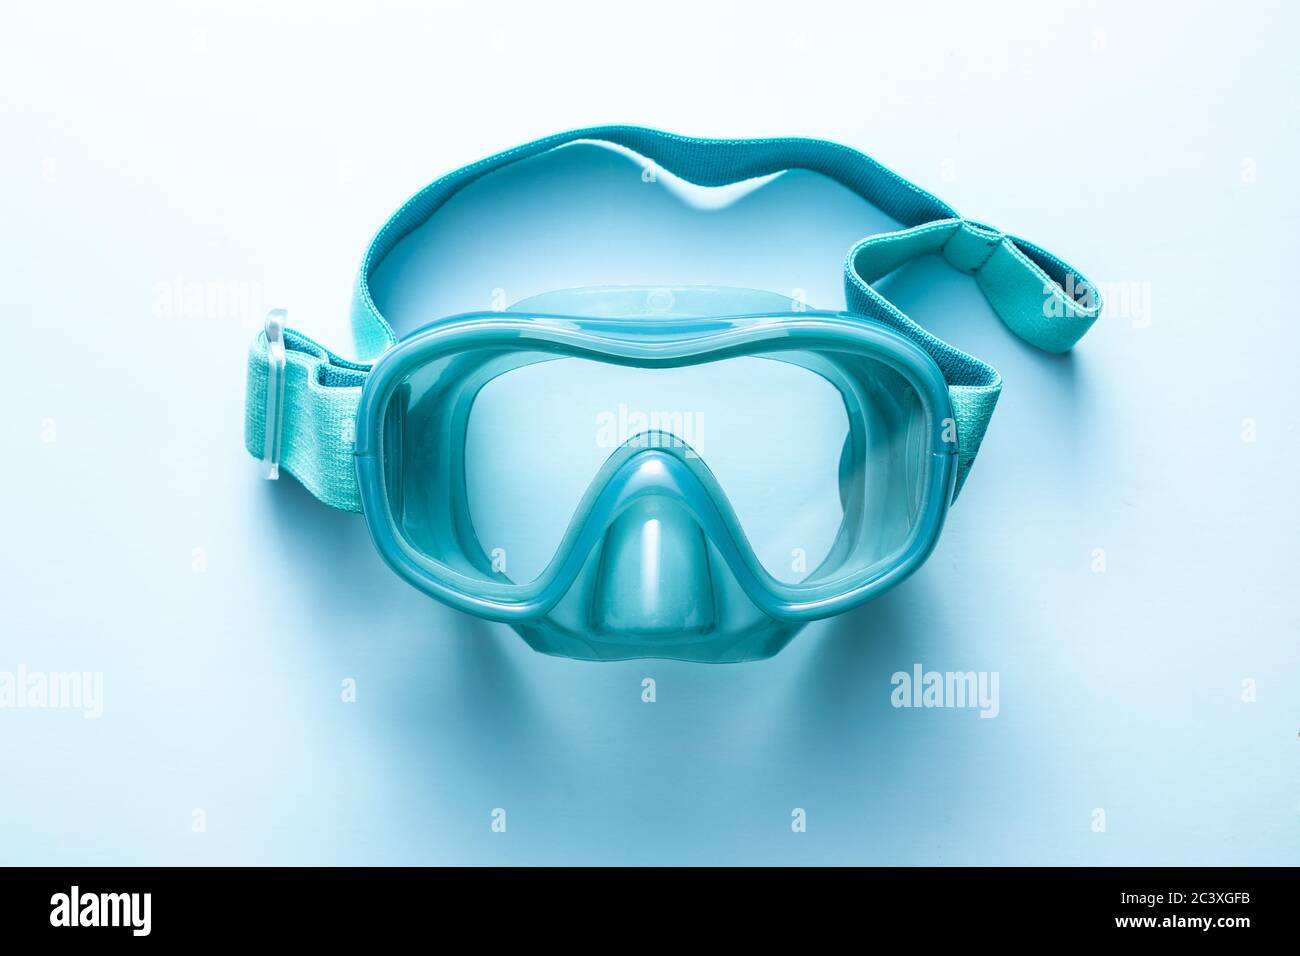 Blue diving mask on blue background. Top view. Stock Photo